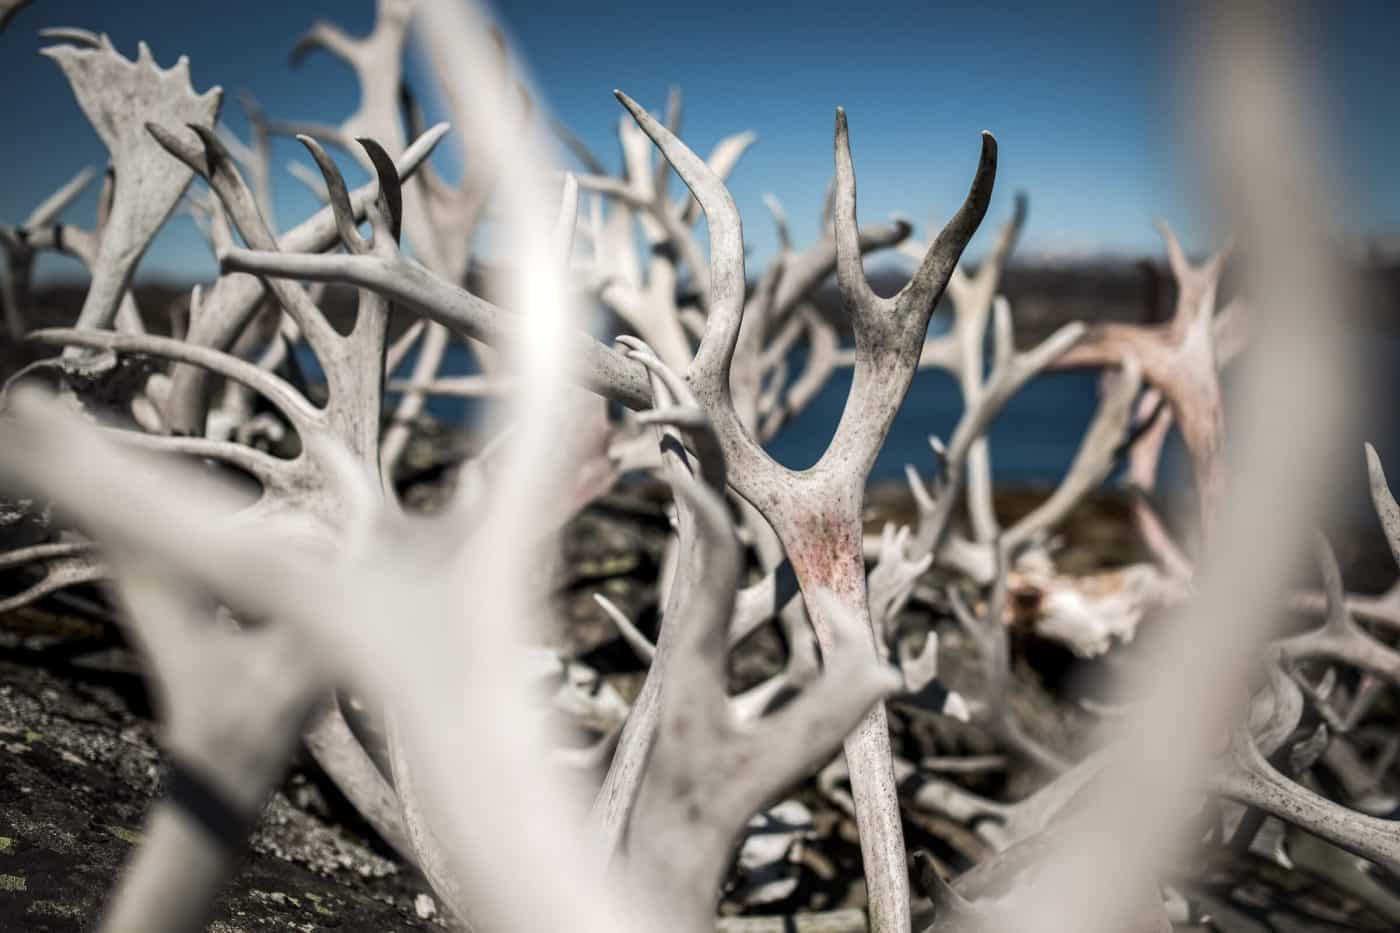 A collection of reindeer antlers outside a house in Qeqertarsuatsiaat south of Nuuk in Greenland. By Mads Pihl